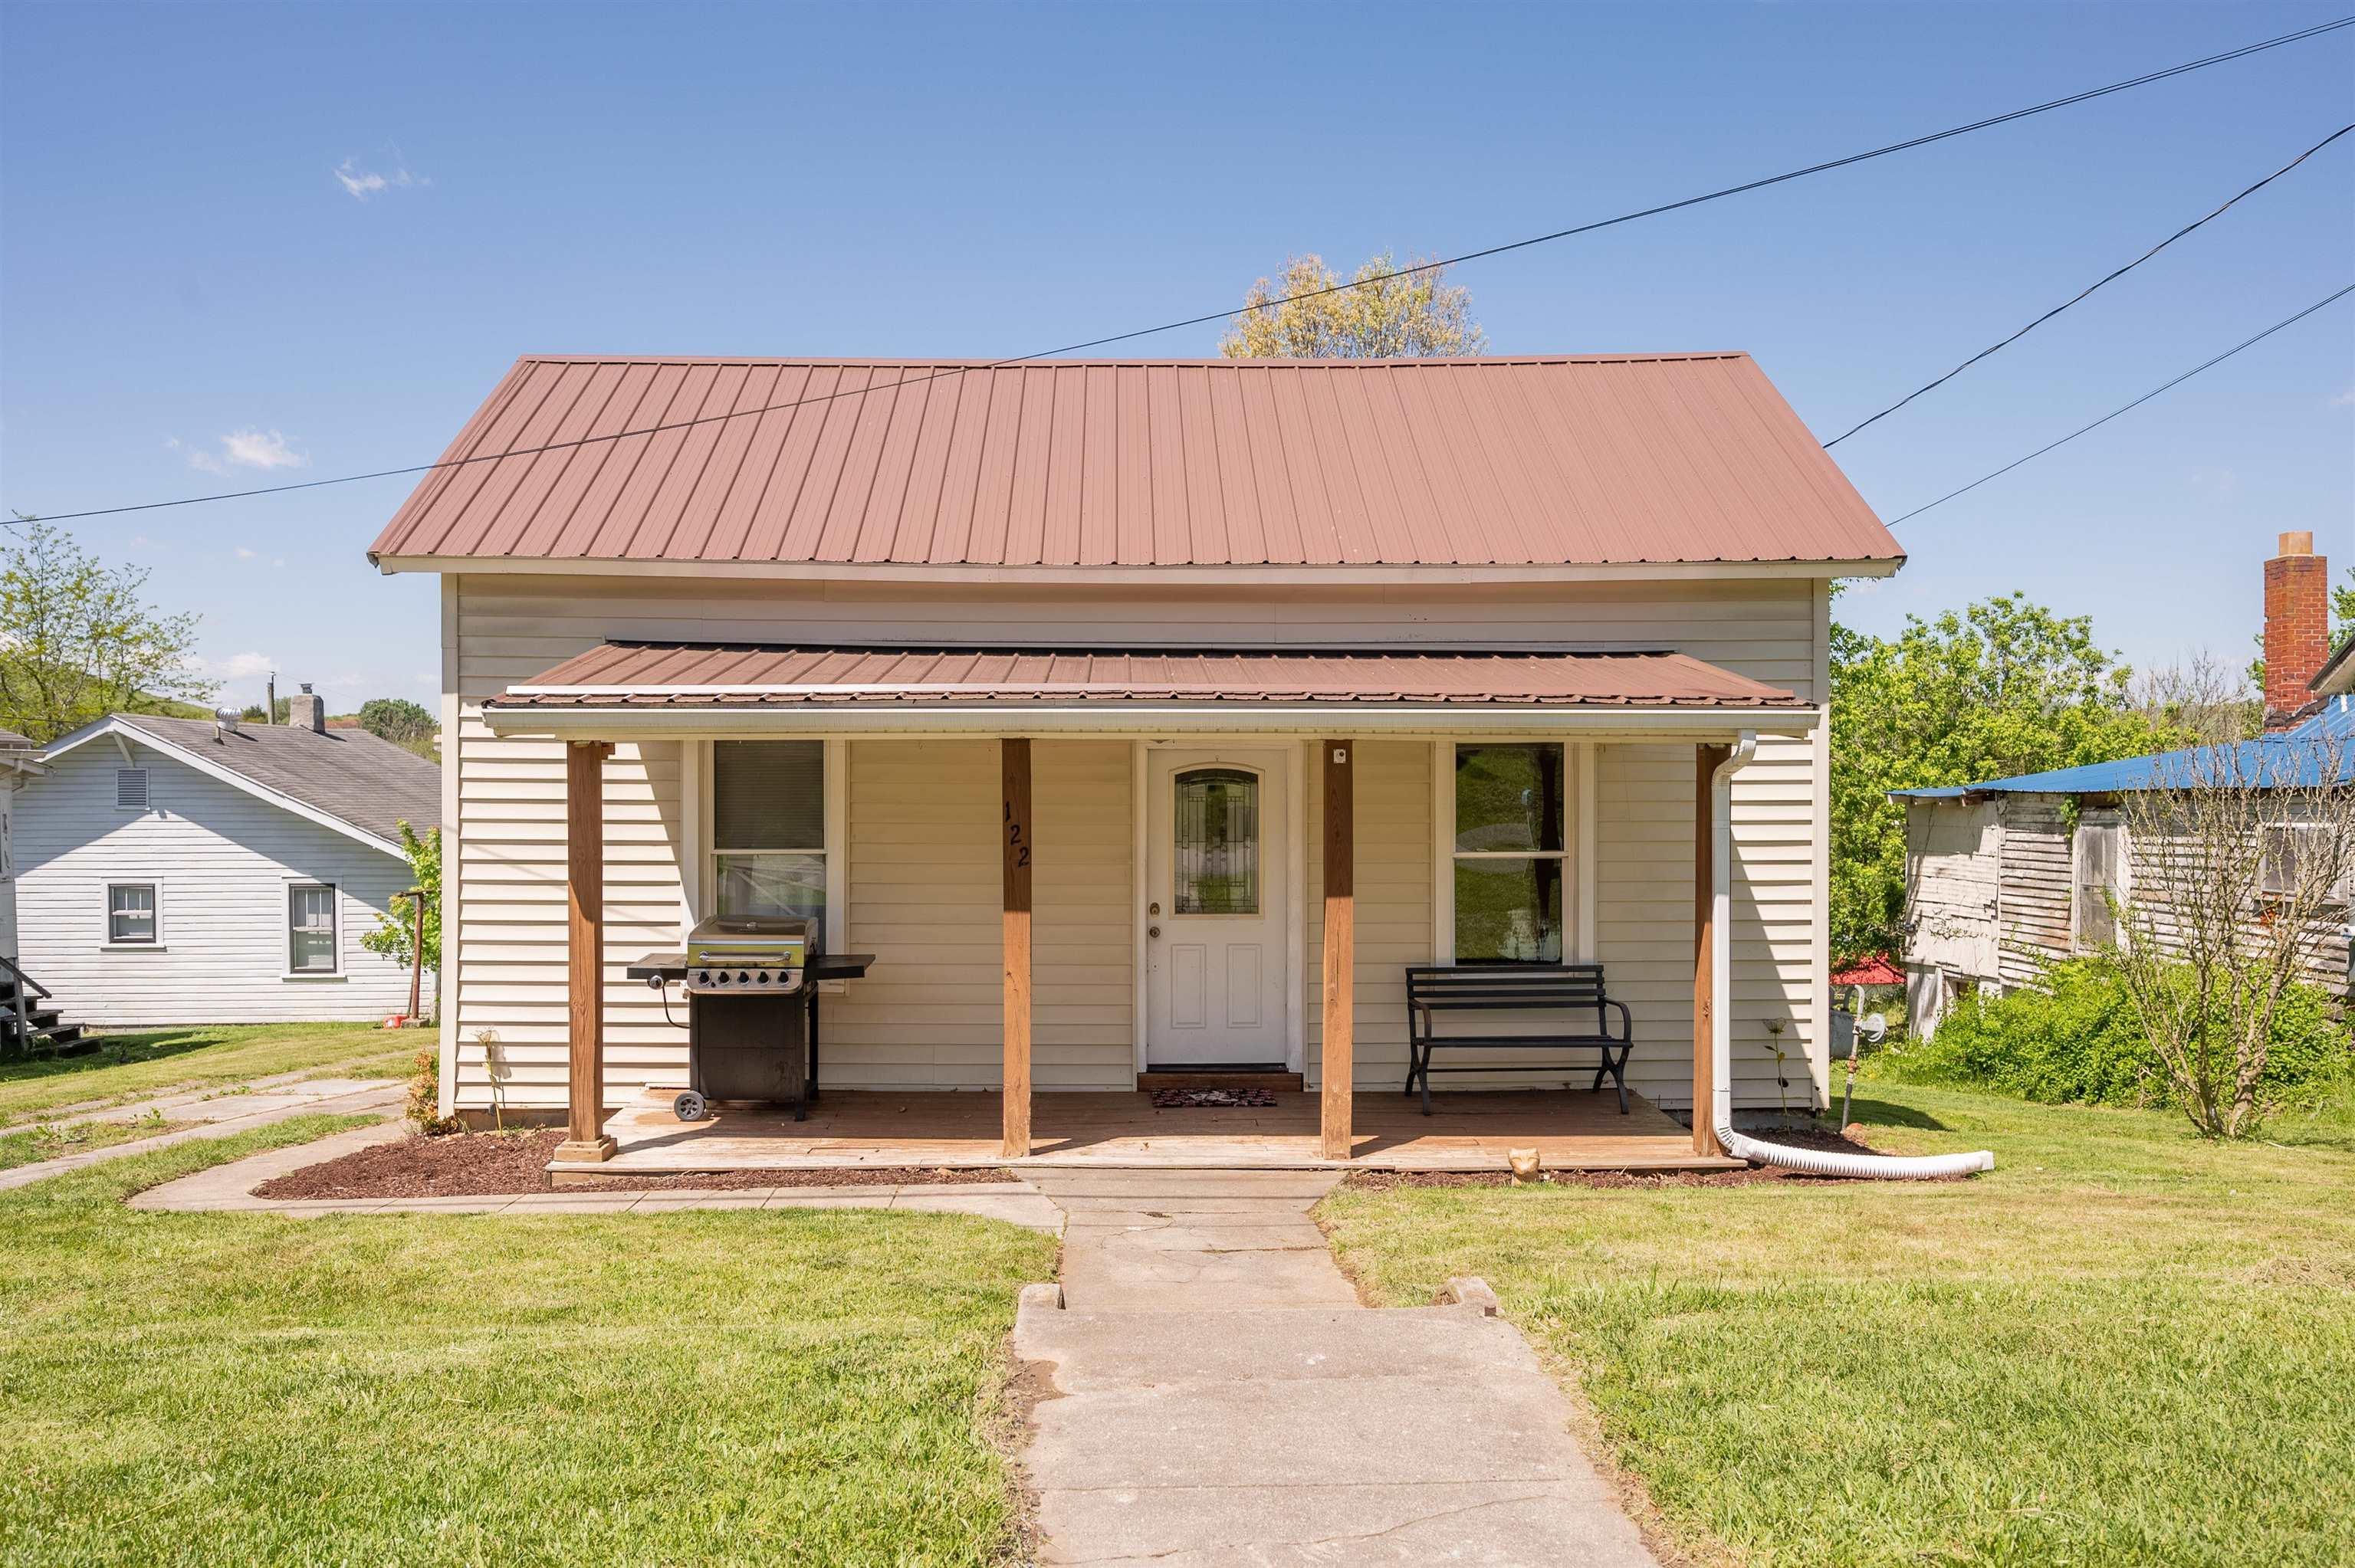 Find your new home in this sweet bungalow/cottage! This 3 BR/ 1.5 BA home has an open living room, hardwood and laminate flooring, plenty of storage space in an homey kitchen. Features a deck that is perfect to outside activities with guests.